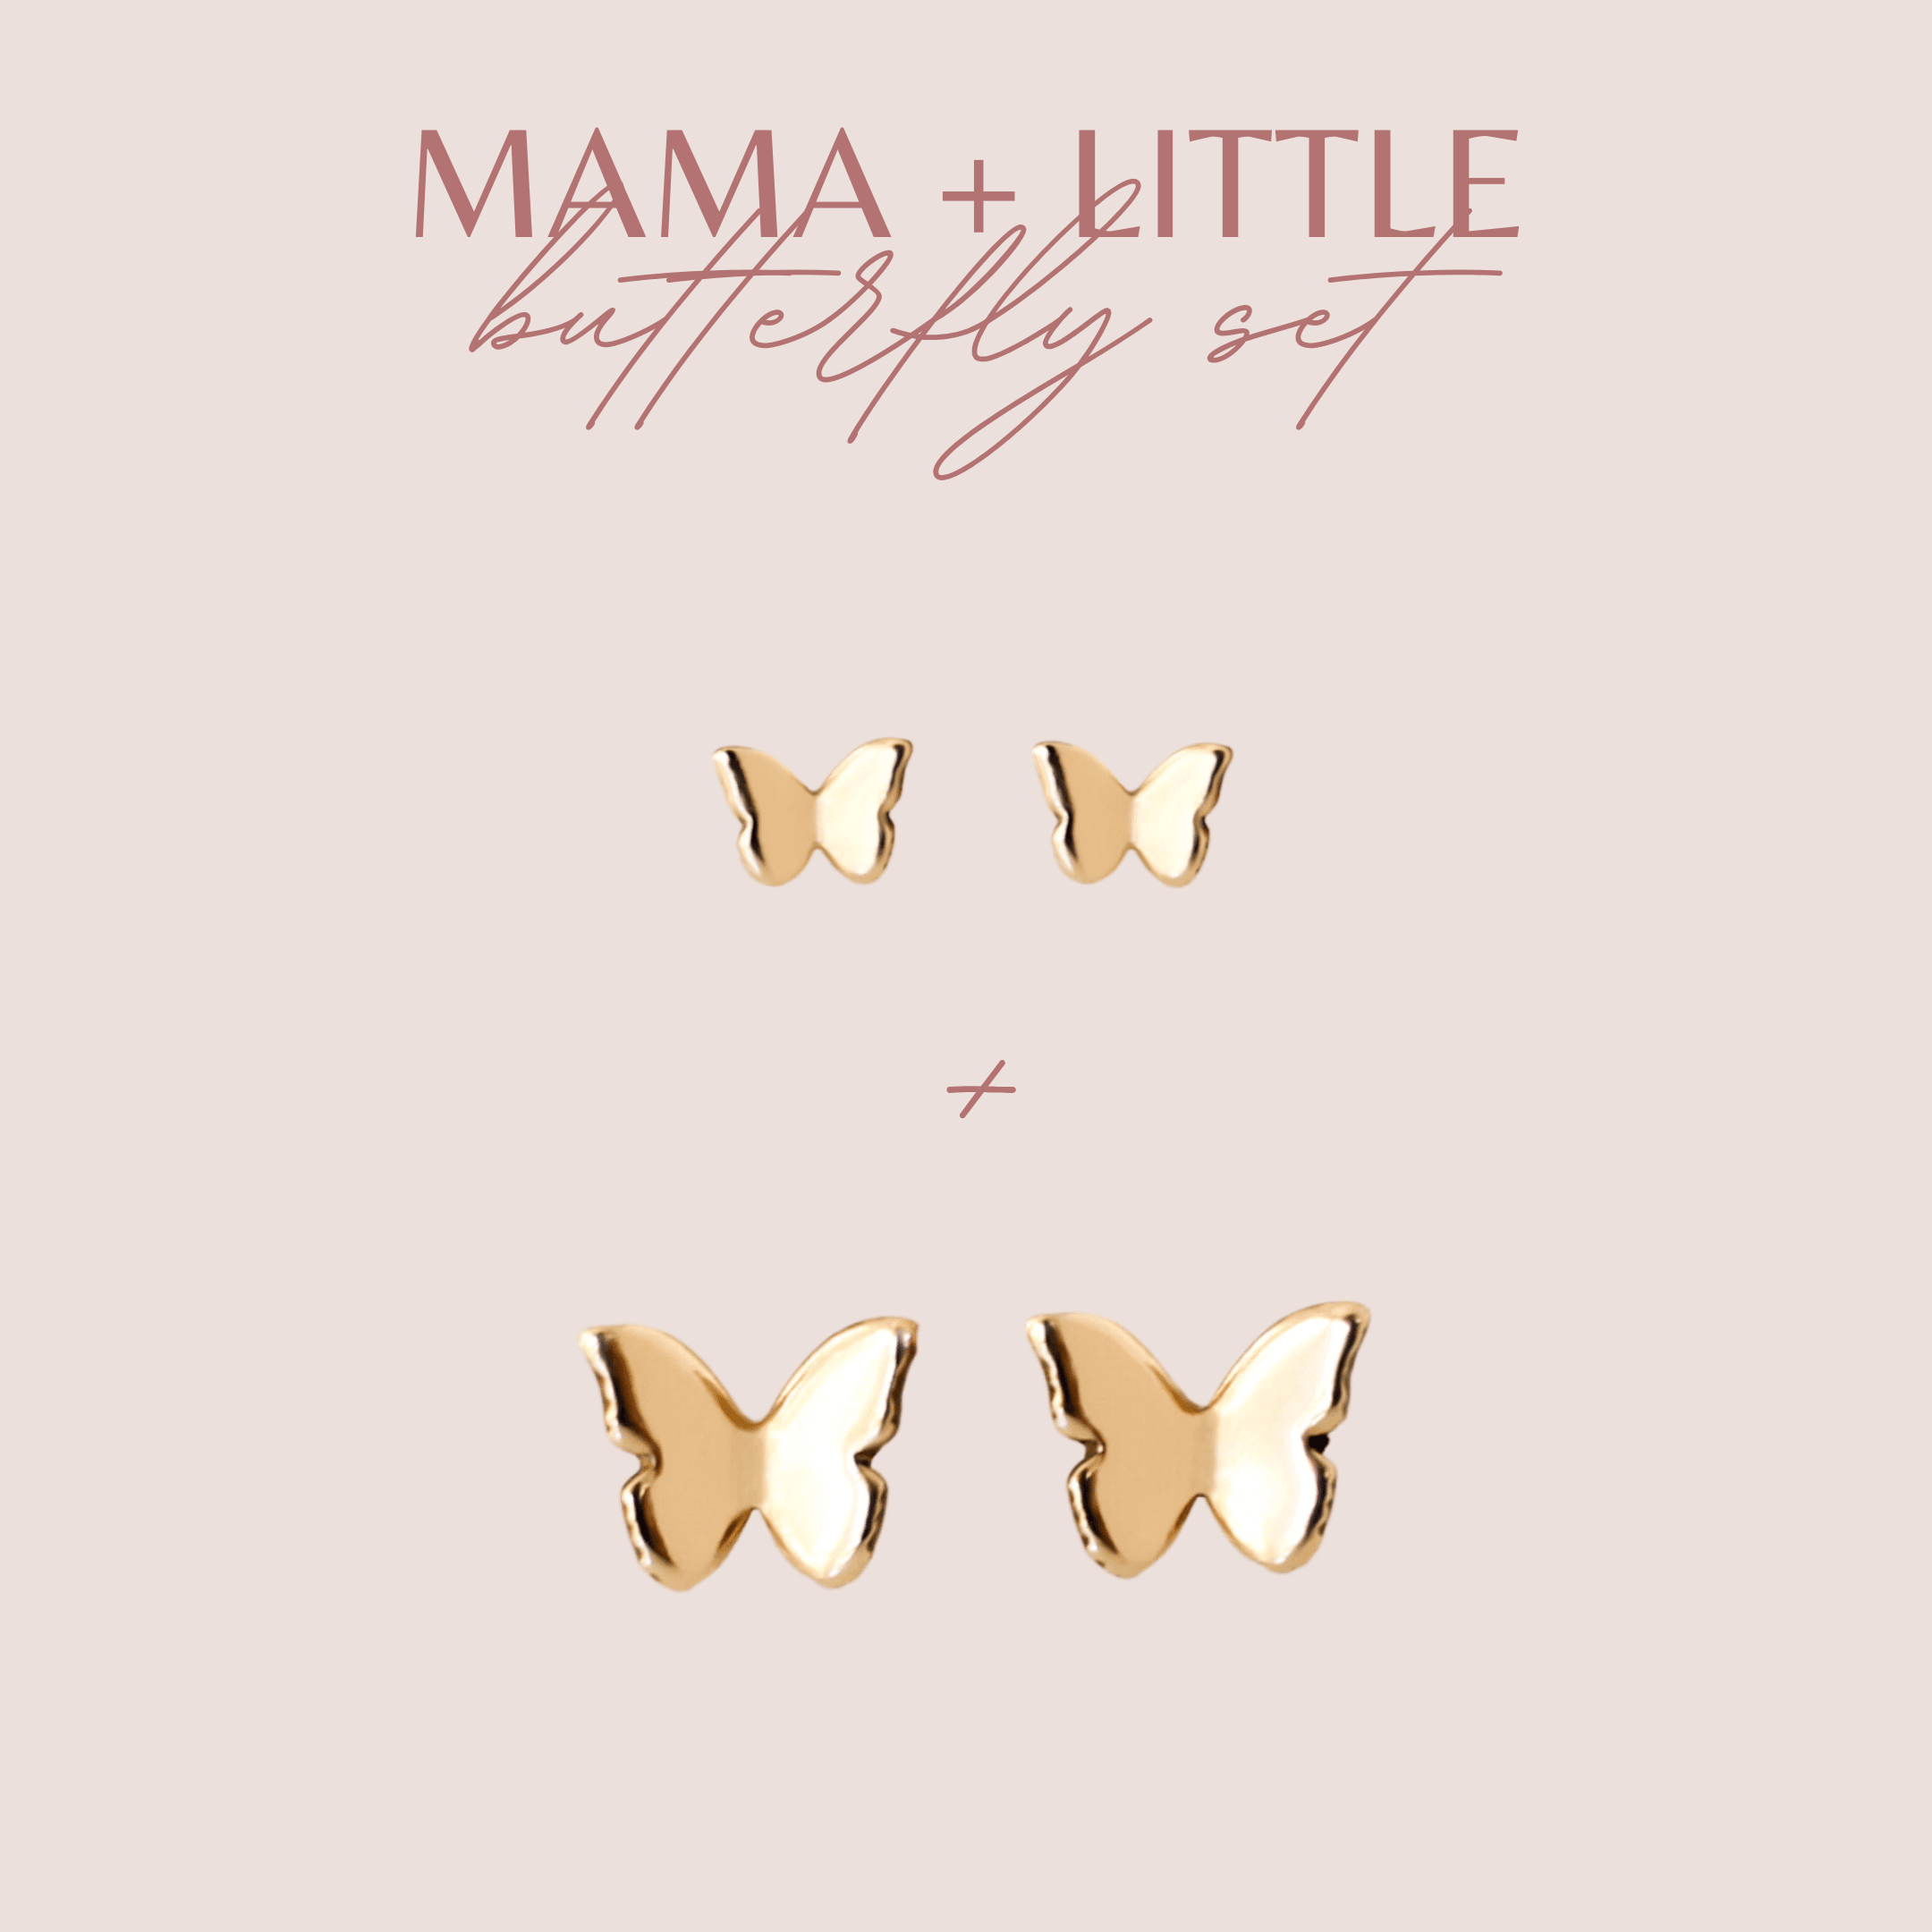 Mama + Little Butterfly Stud Earring Set - Nolia Jewelry - Meaningful + Sustainably Handcrafted Jewelry